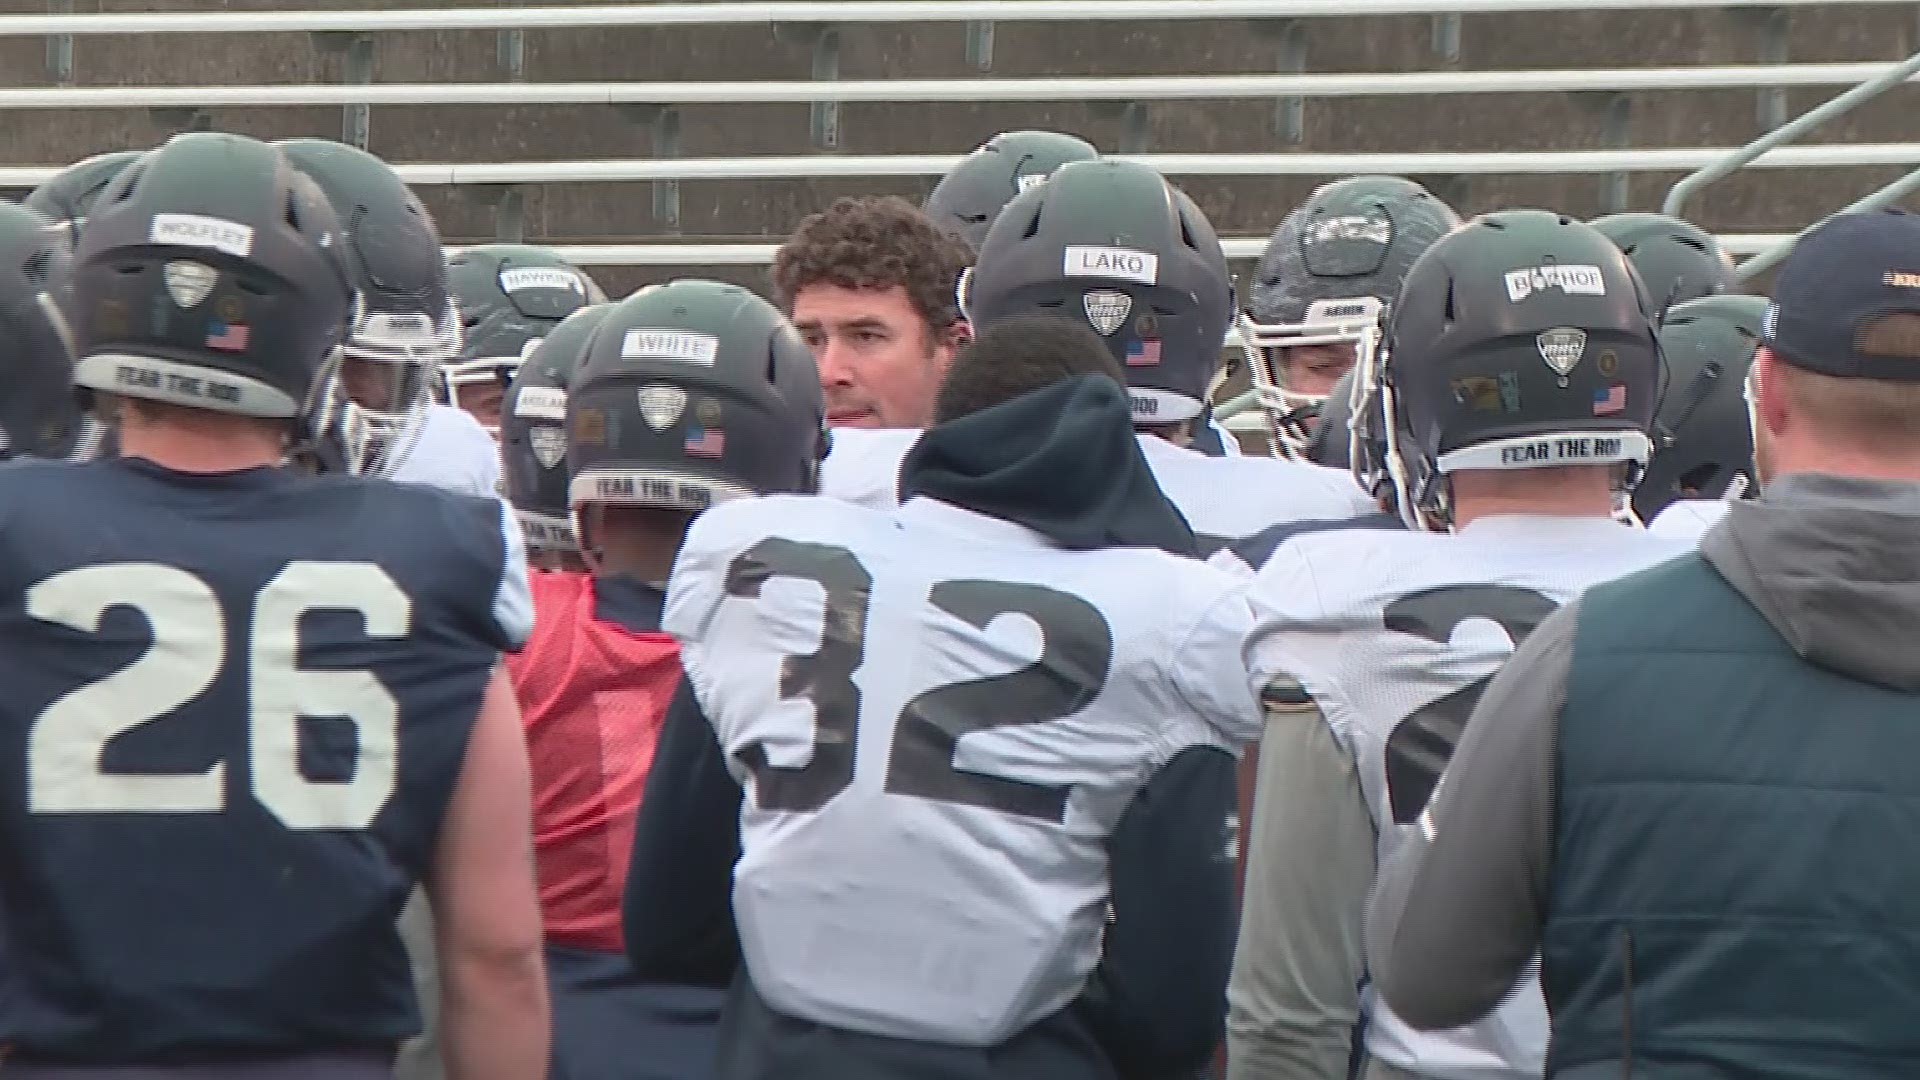 Go behind the scenes with new Akron head coach and Northeast Ohio native Tom Arth during spring practice.